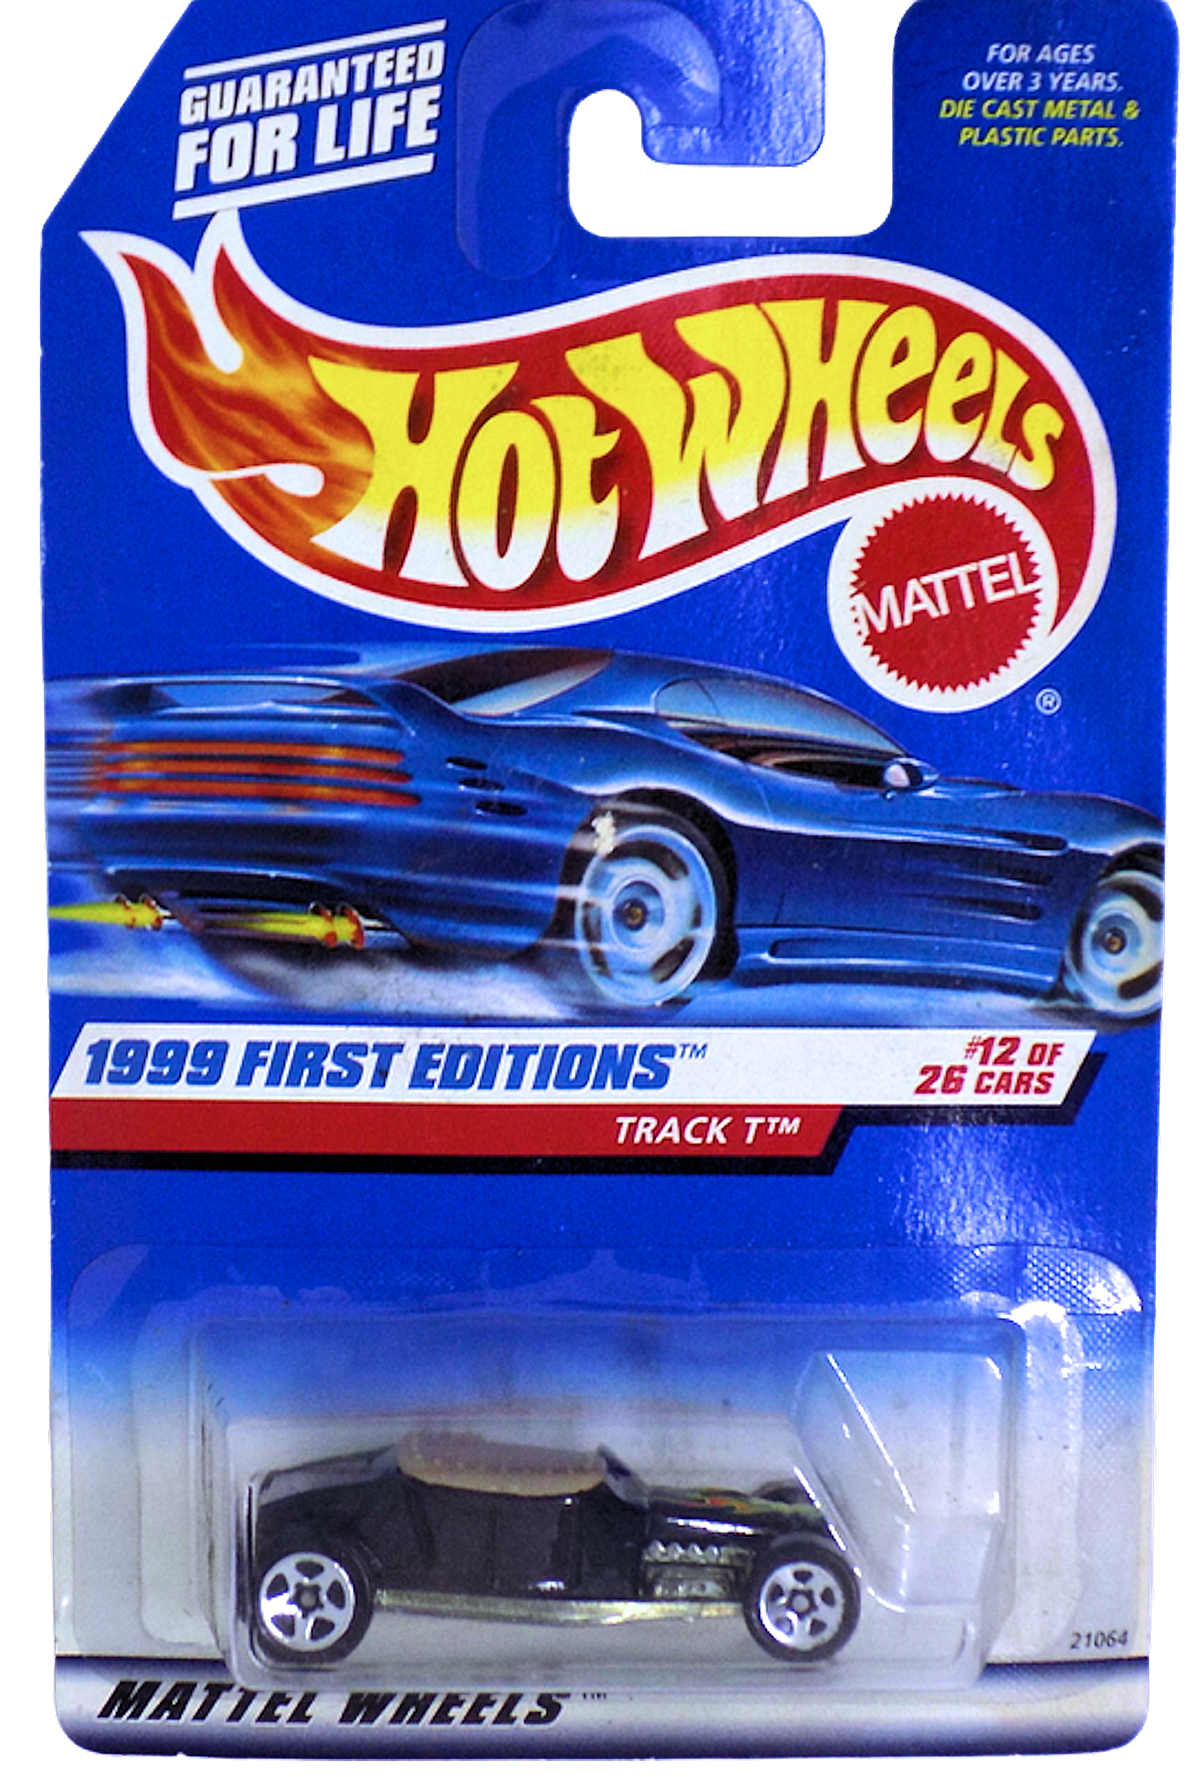 Hot Wheels 1999 - Collector # 917 - First Editions 12/26 - Track T - Black